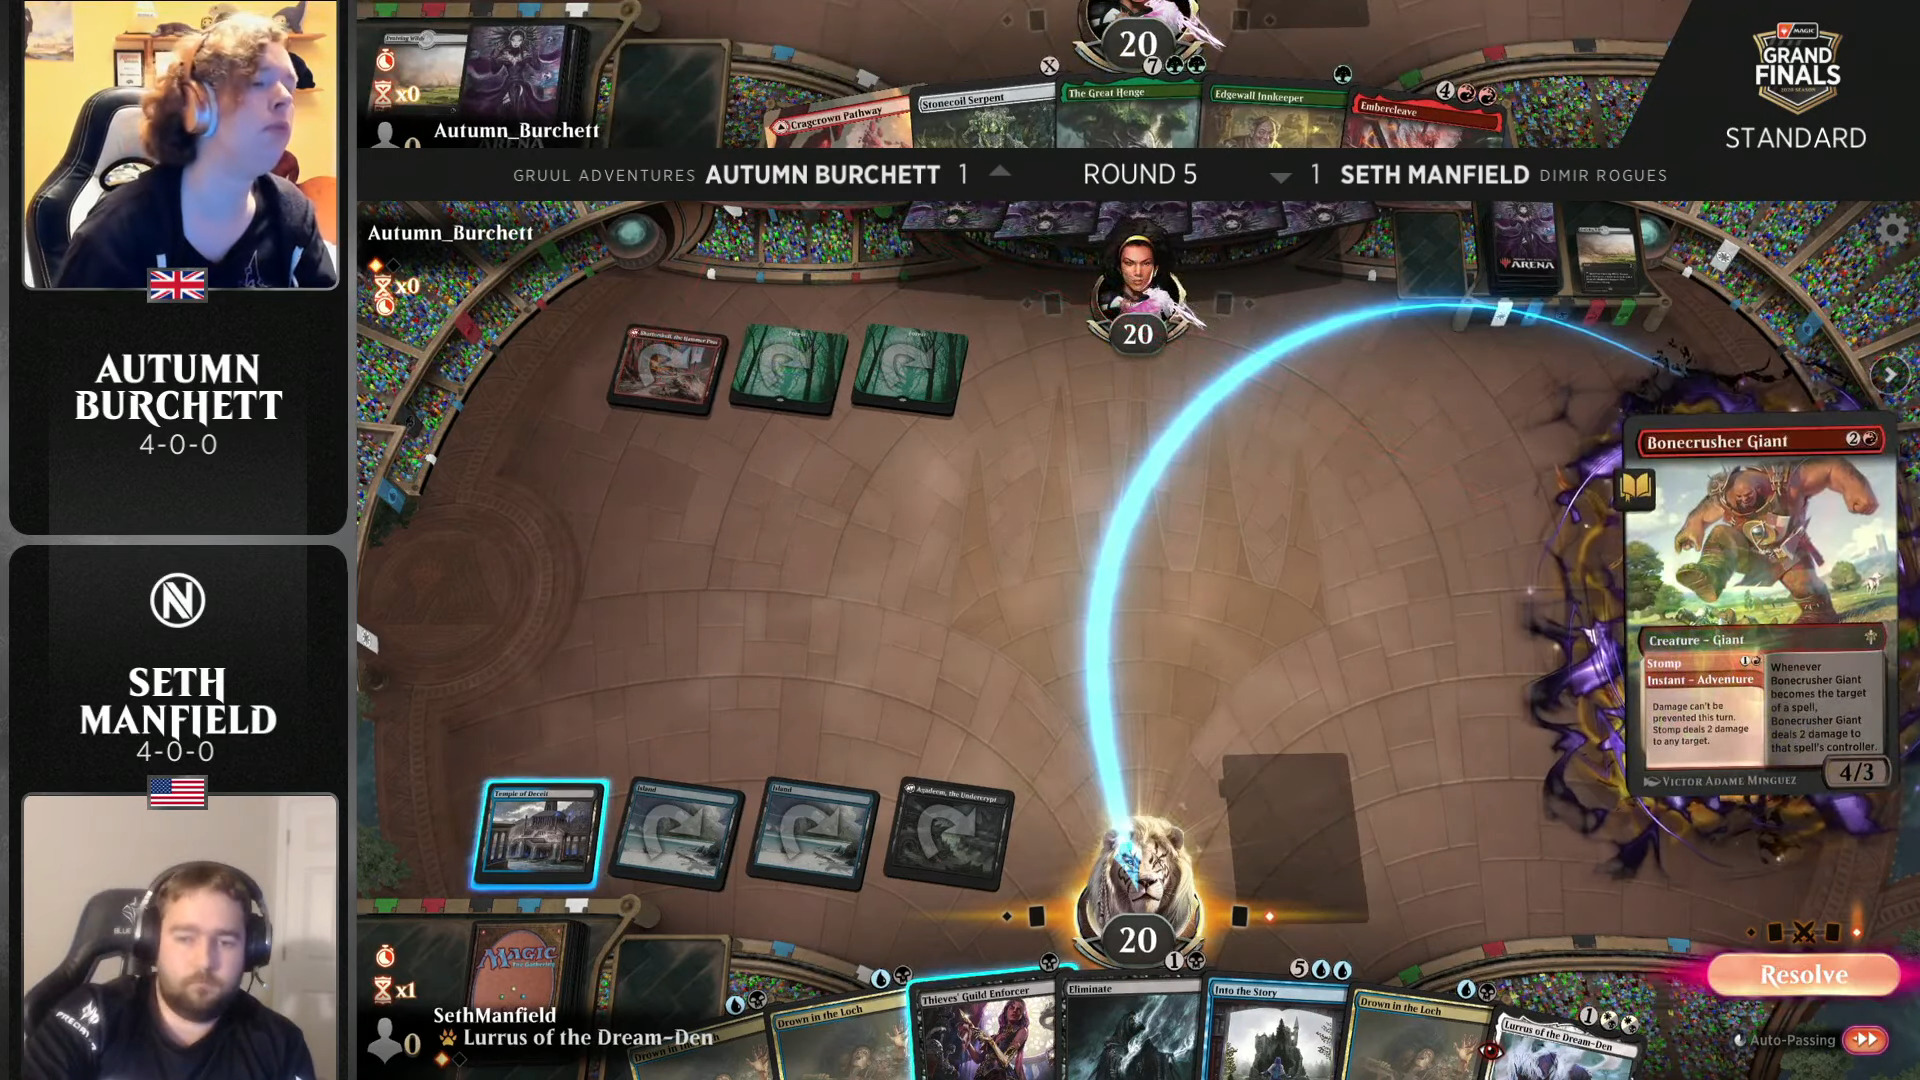 Magic: The Gathering 2020 Grand Finals Is Down To Top 8, Omnath Decks Dominate